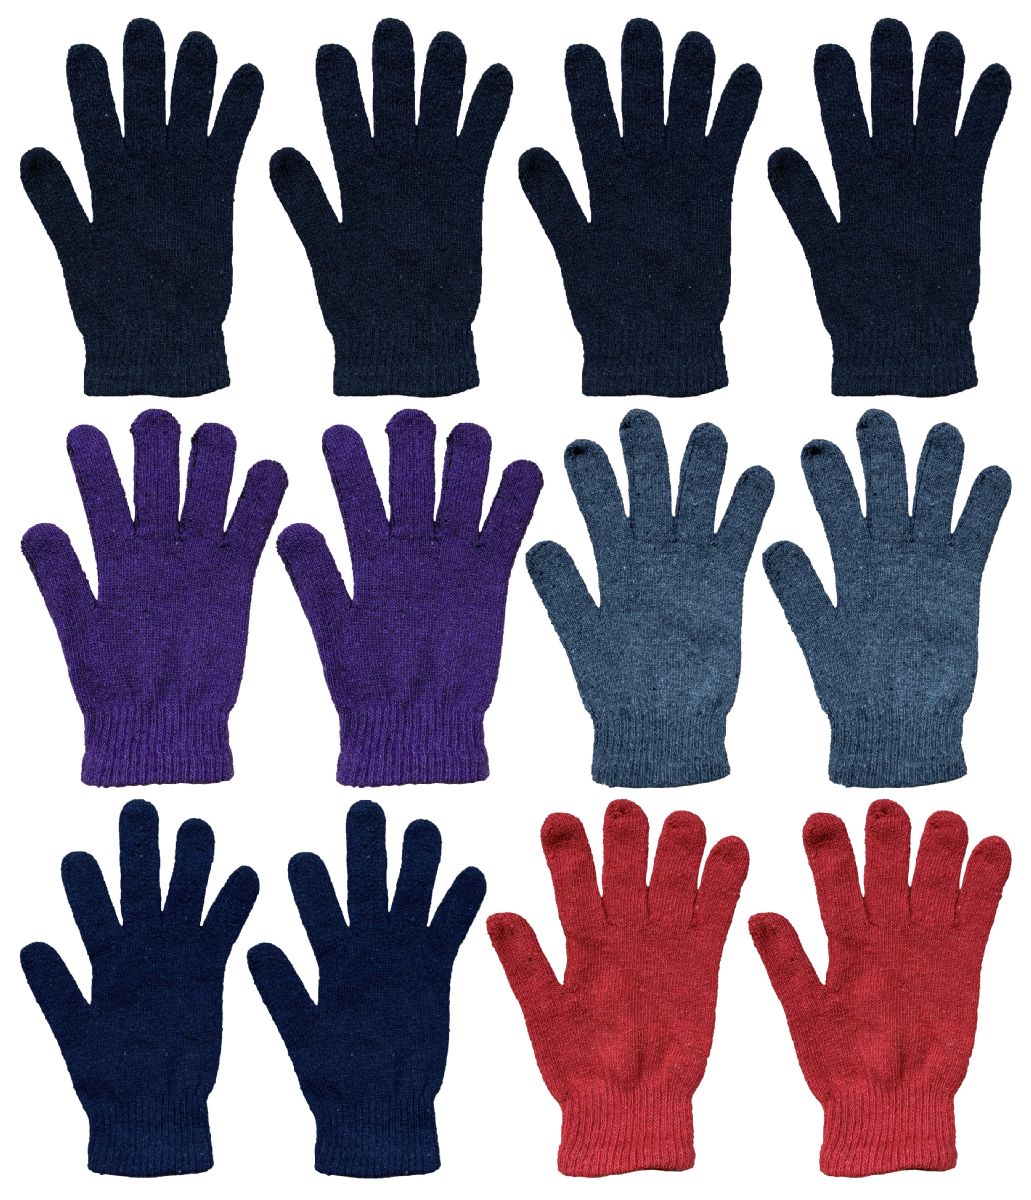 24 Wholesale Yacht & Smith Kids Warm Winter Colorful Magic Stretch Gloves Ages 2-8 Bulk Pack